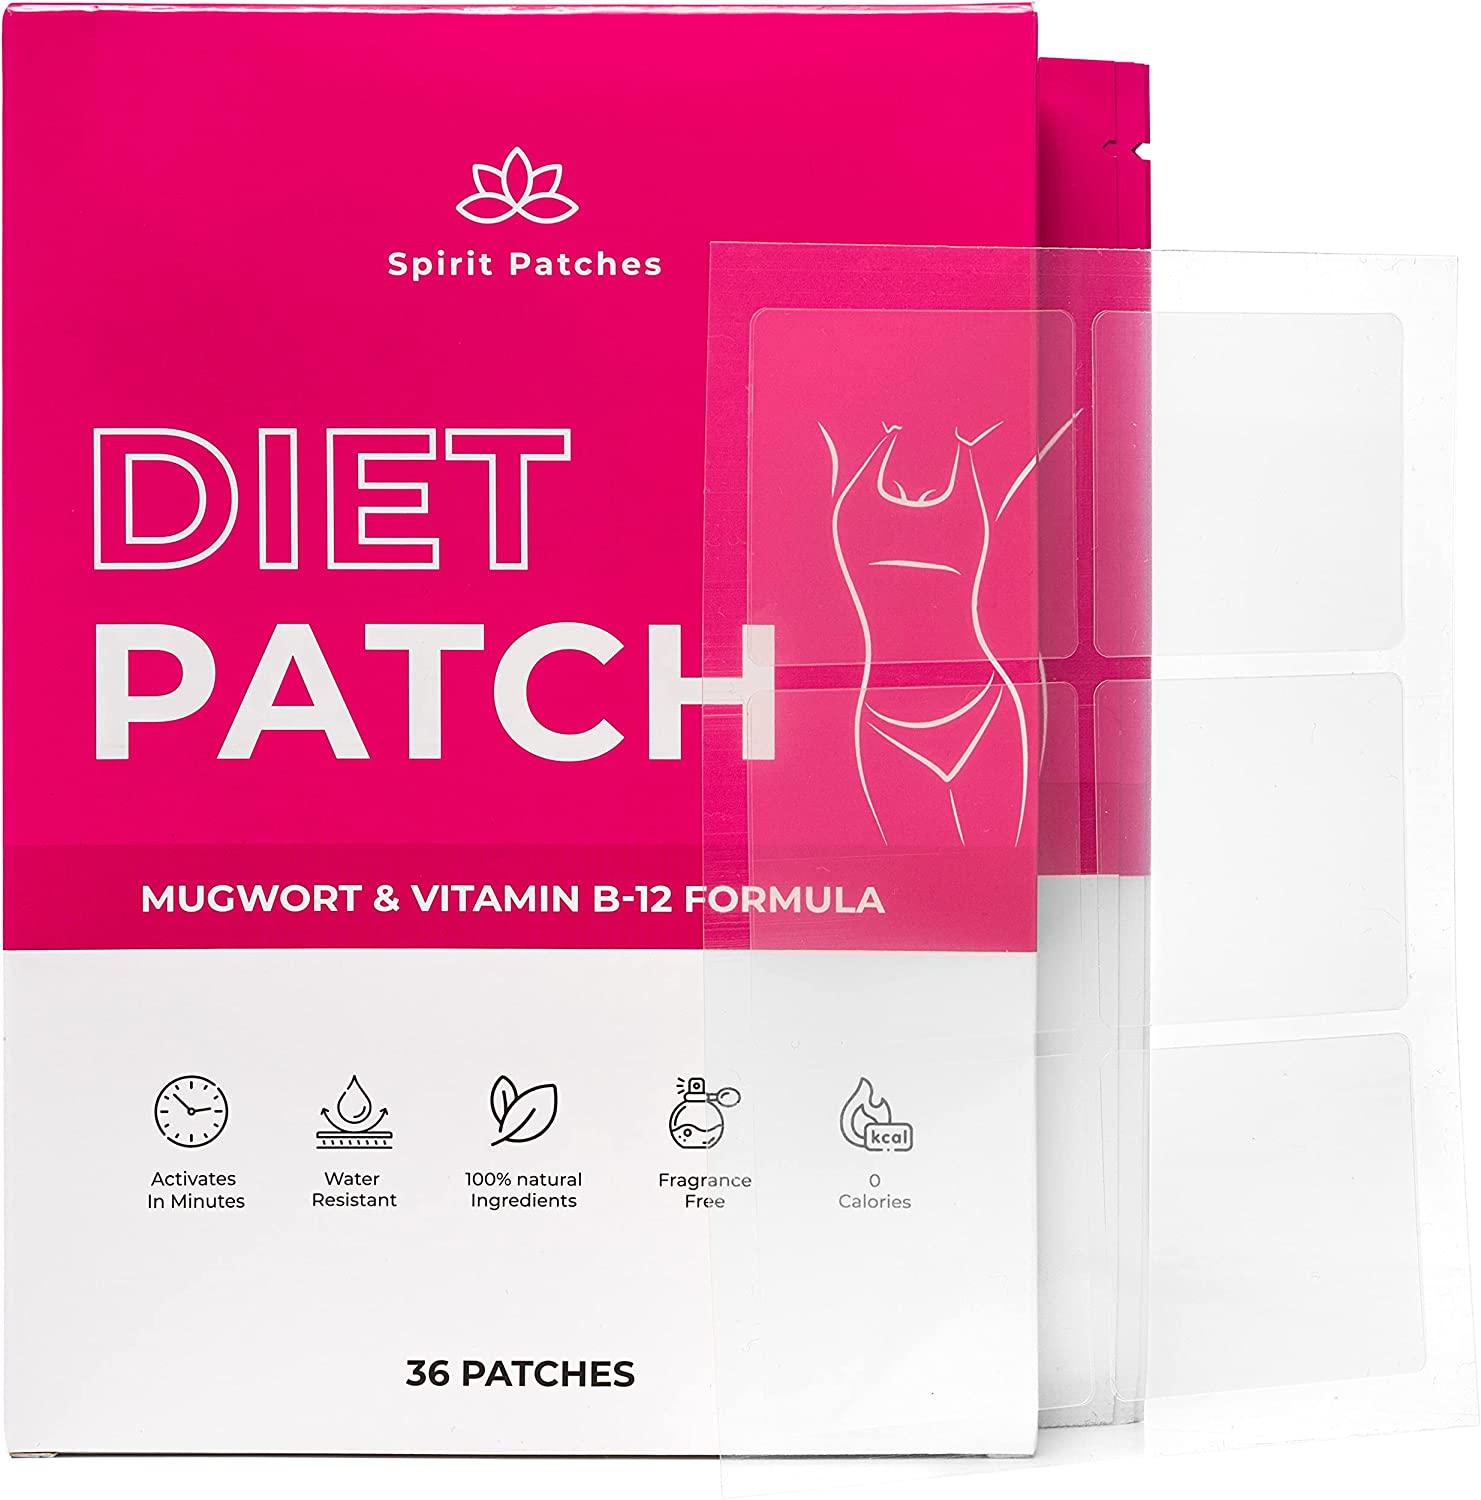 3 Weight Loss Patches Tested: Find Out Which One Can Help You Shed the Pounds!